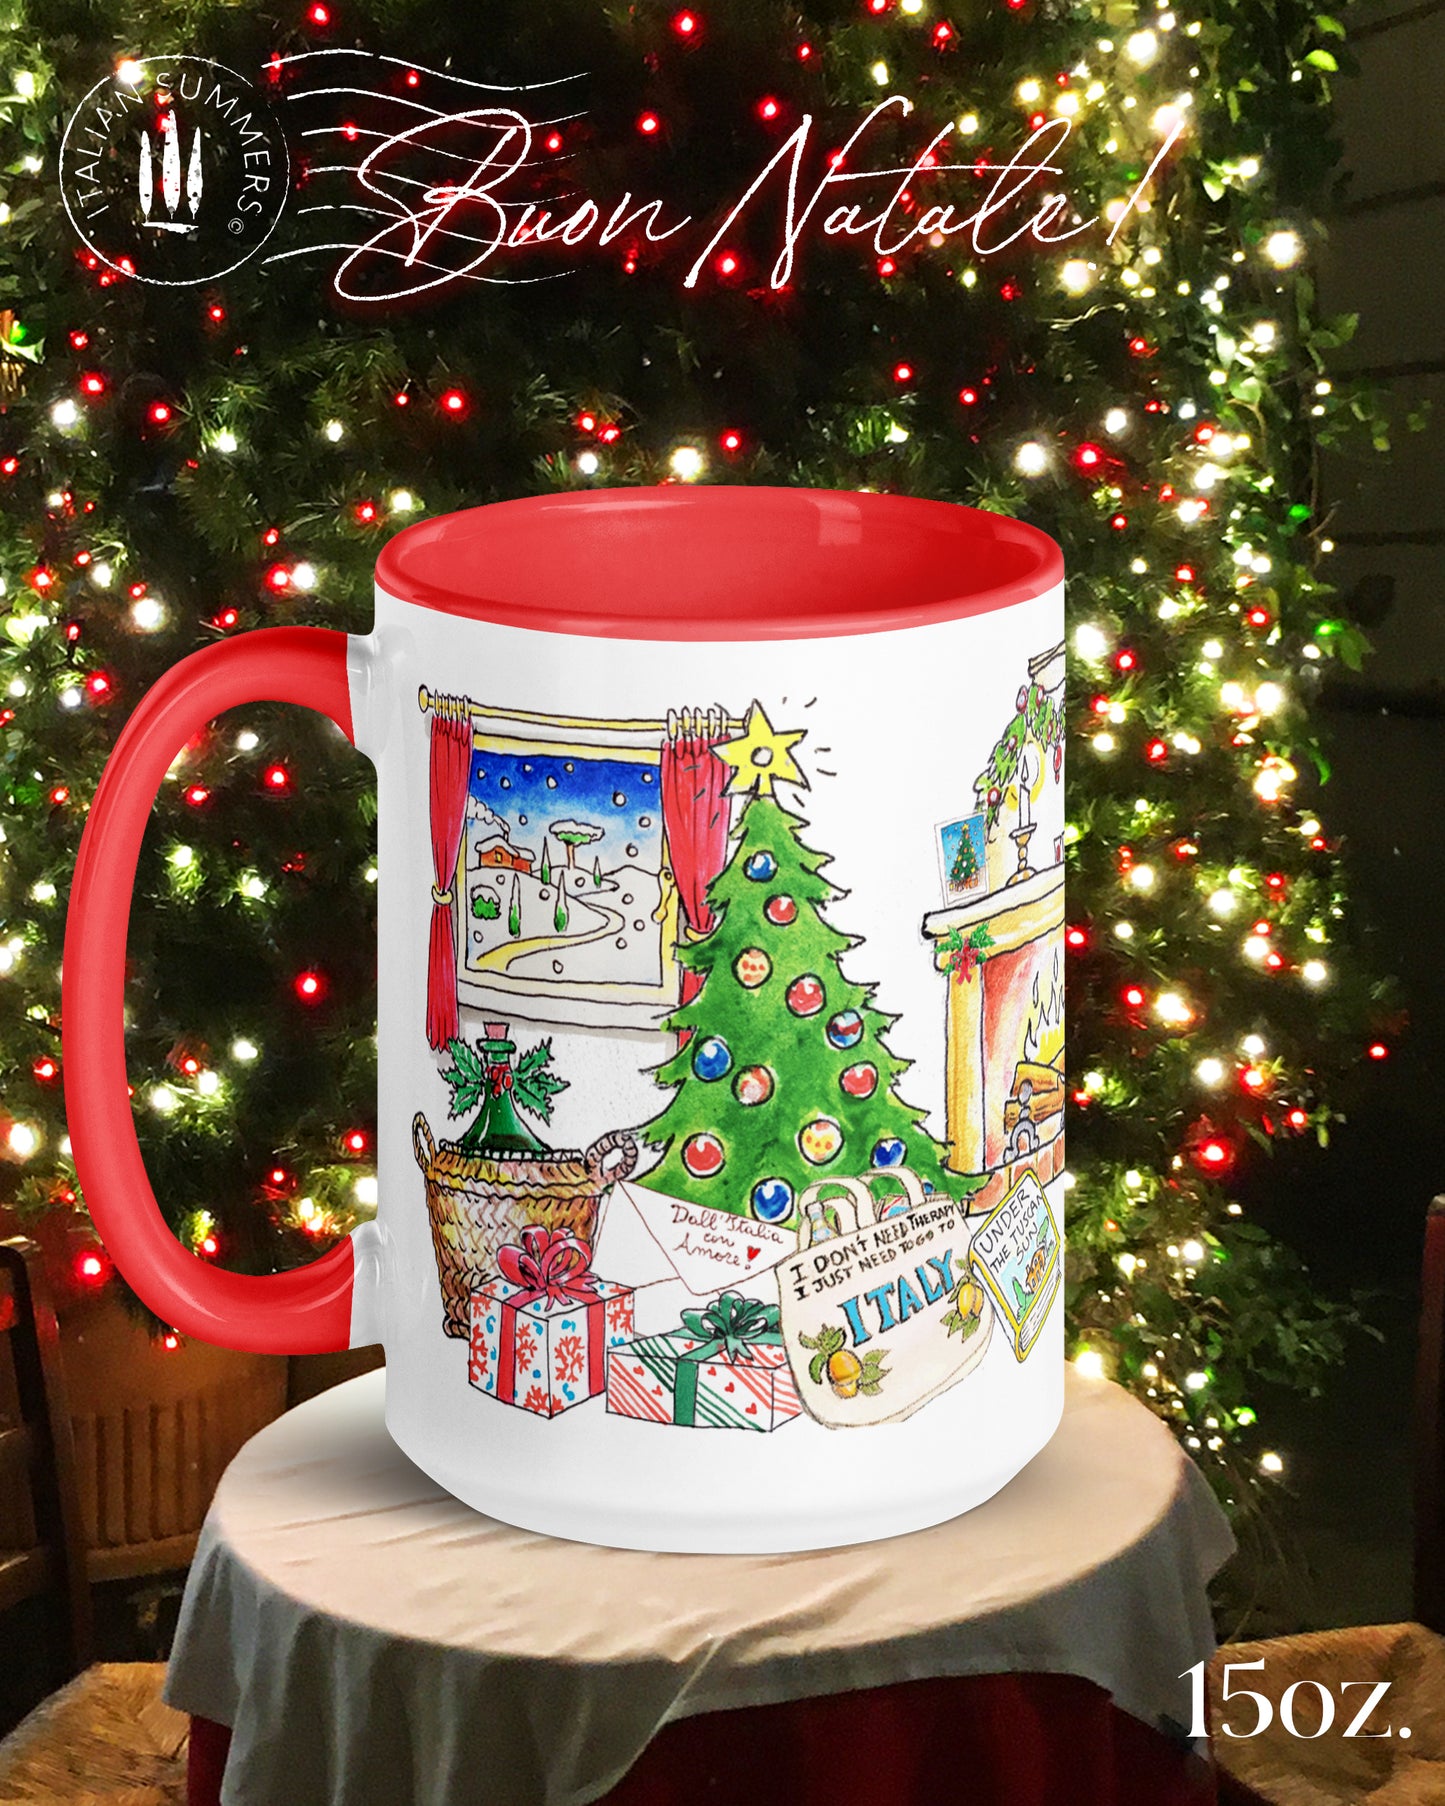 An Italy-inspired ceramic 15 0z. mug with a design of a vintage FIAT 500 car, loaded with gifts dashing through the snow, airline tickets to Italy, traditional Italian Christmas food, a fireplace with garlands, and a n array of presents .